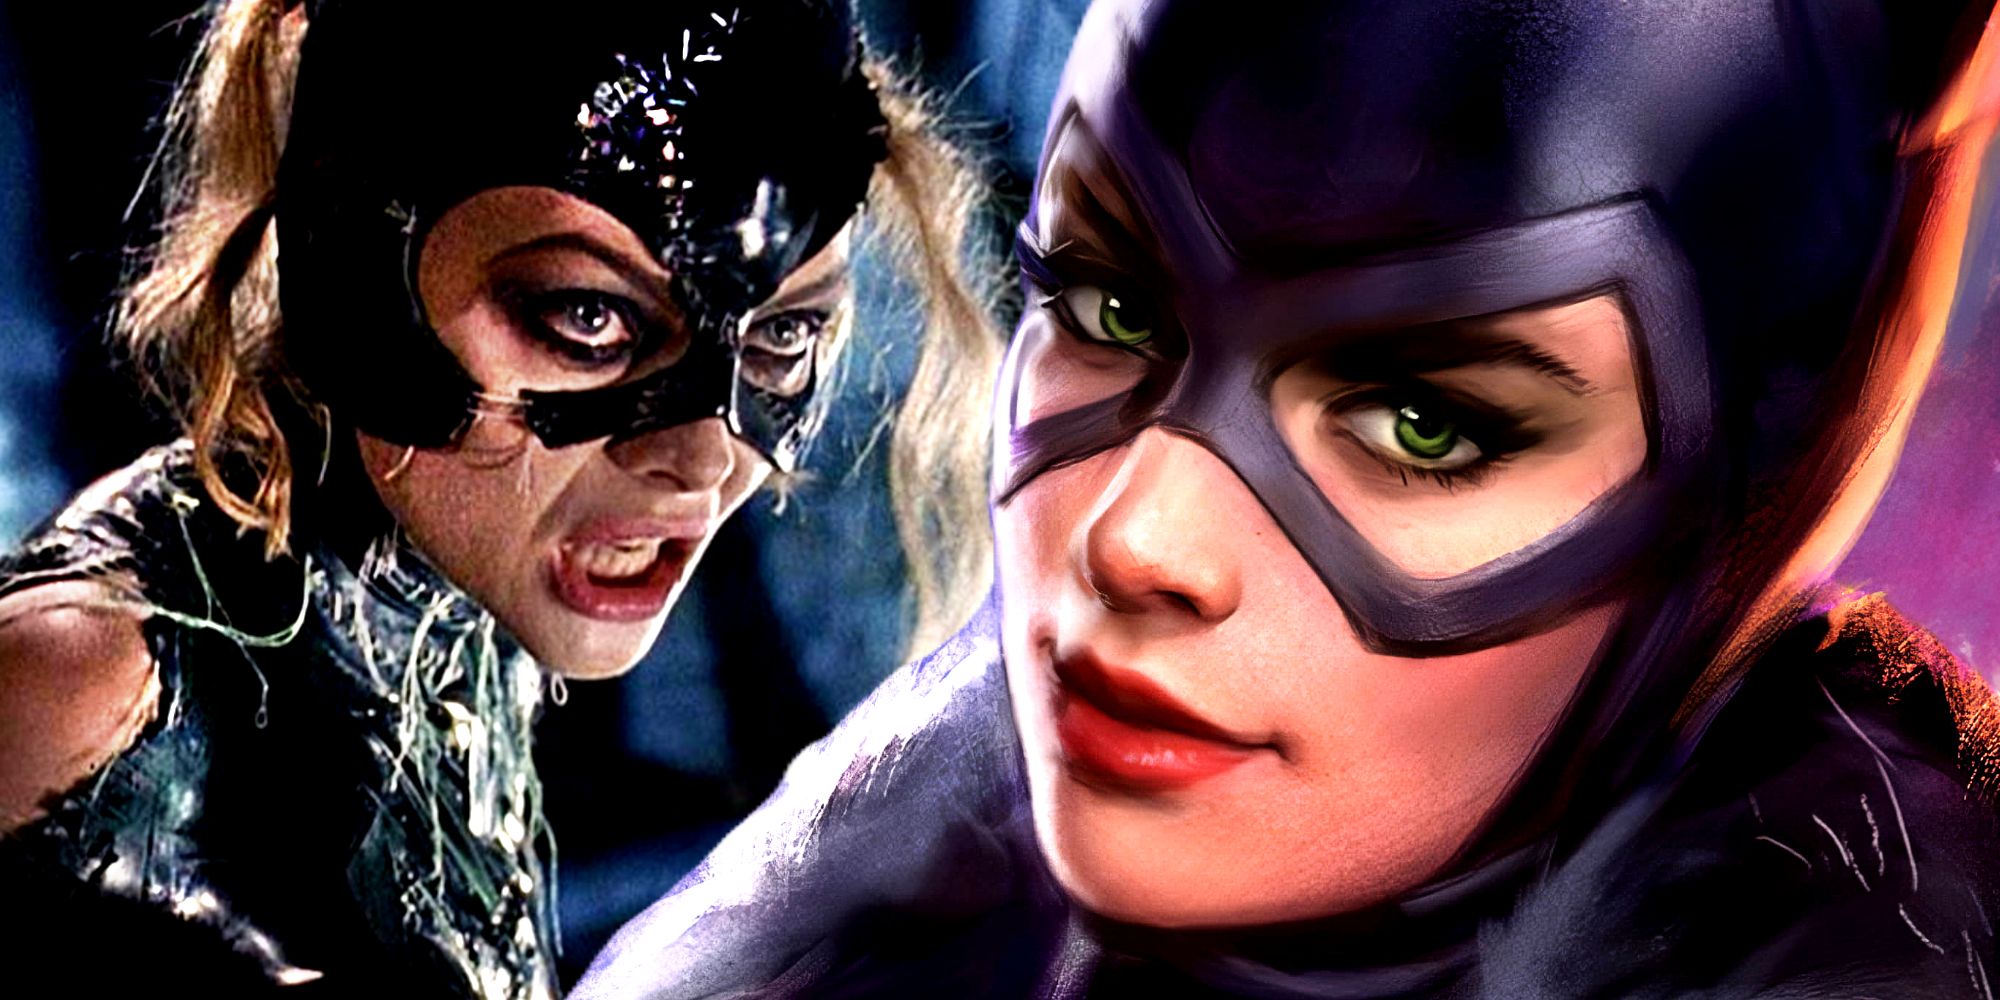 Michelle Pfeiffer Wears the Tattered Catwoman Costume in Batman Returns and Selina Kyle in DC Comics Art